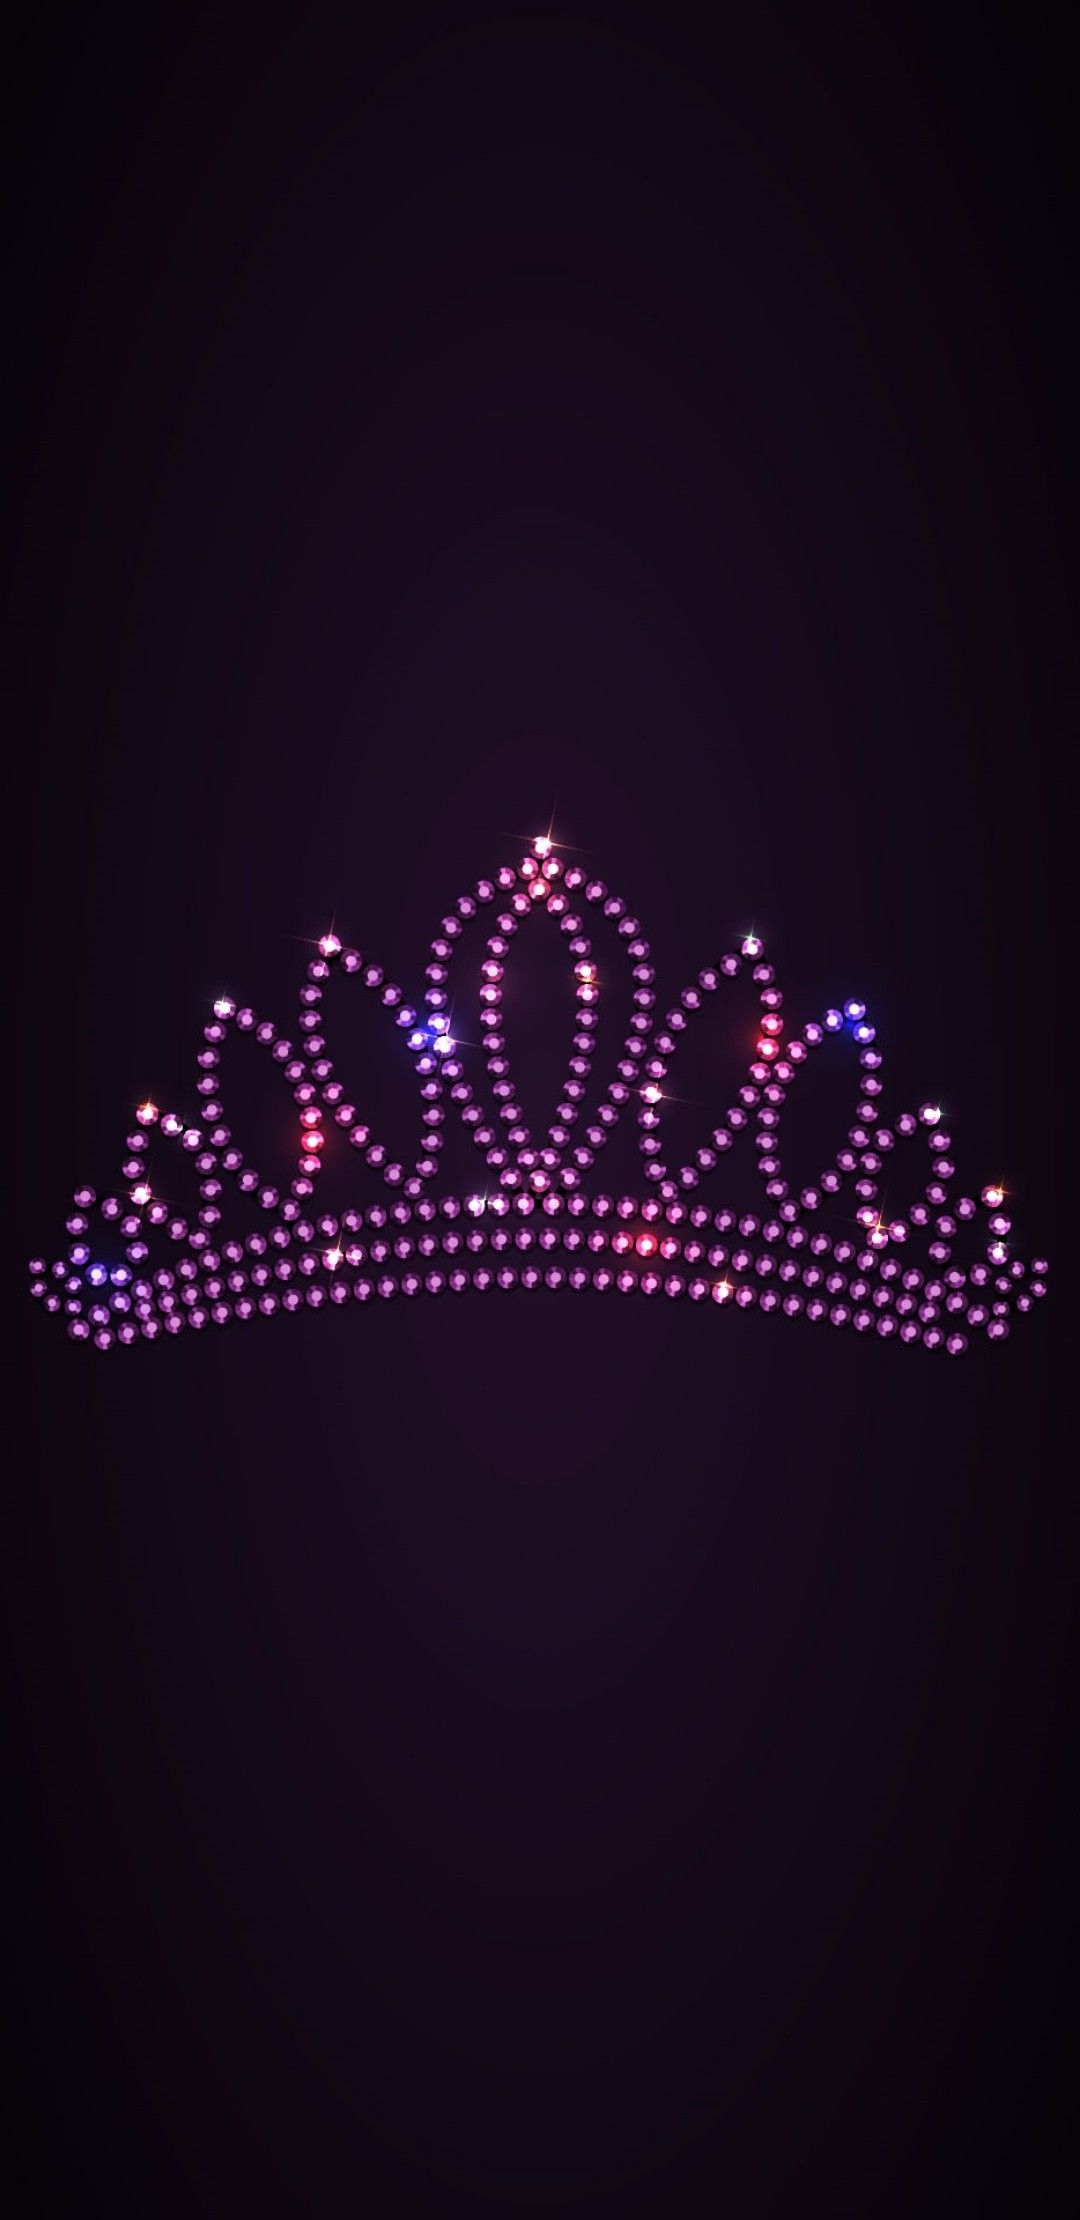 1080x2220 Pin by NicoleMaree77 on Crown, Princess, Queen Wallpaper | Crown background, Gold background, Queens wallpaper